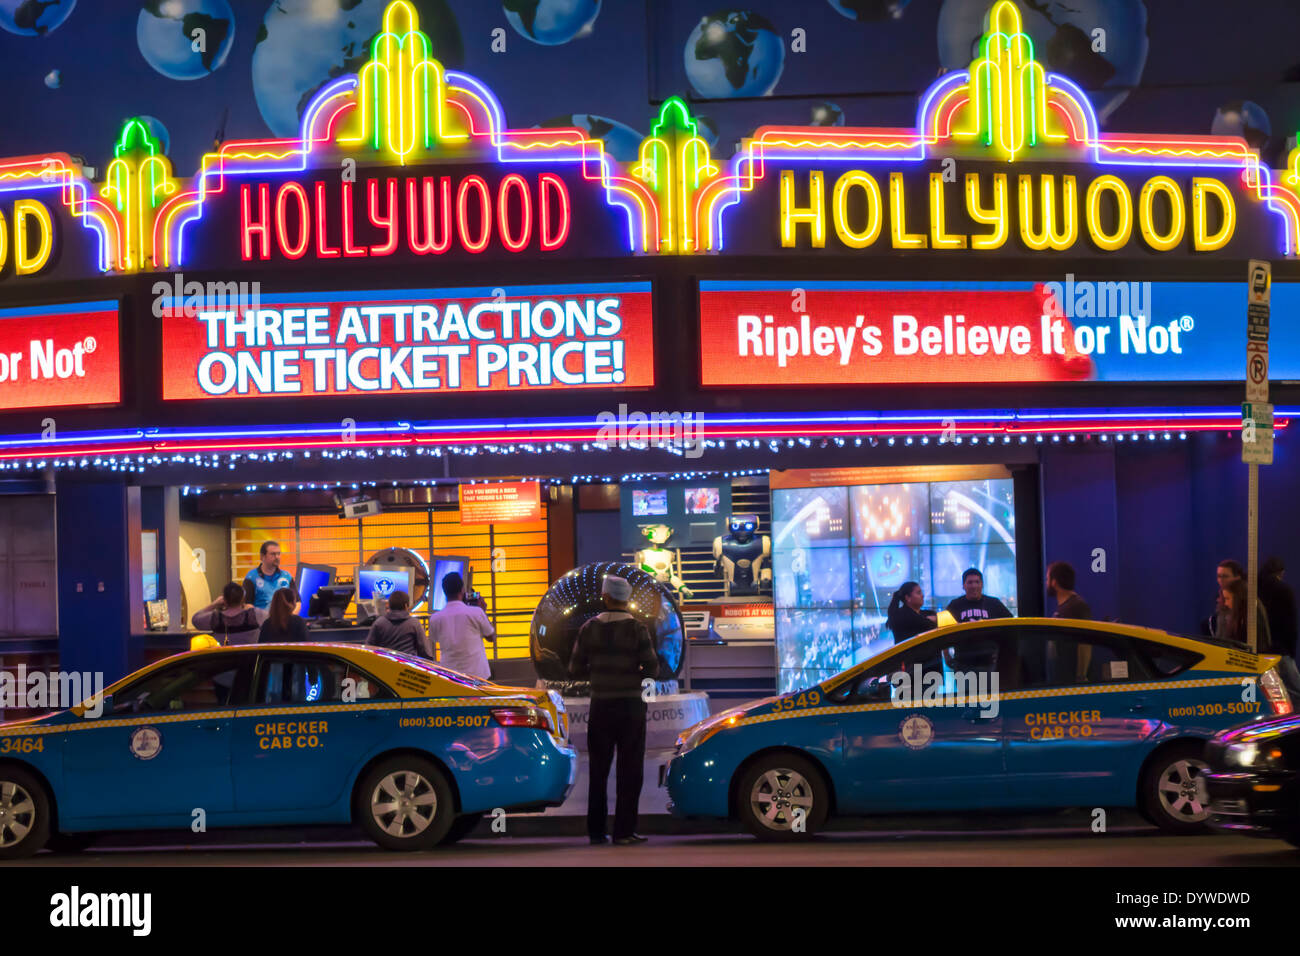 Los Angeles California, LA, Hollywood Boulevard, industria cinematografica, Hollywood Walk of Fame, Ripley's Believe IT or Not, museo, neon, cartello, tendone, ingresso, taxi, Foto Stock